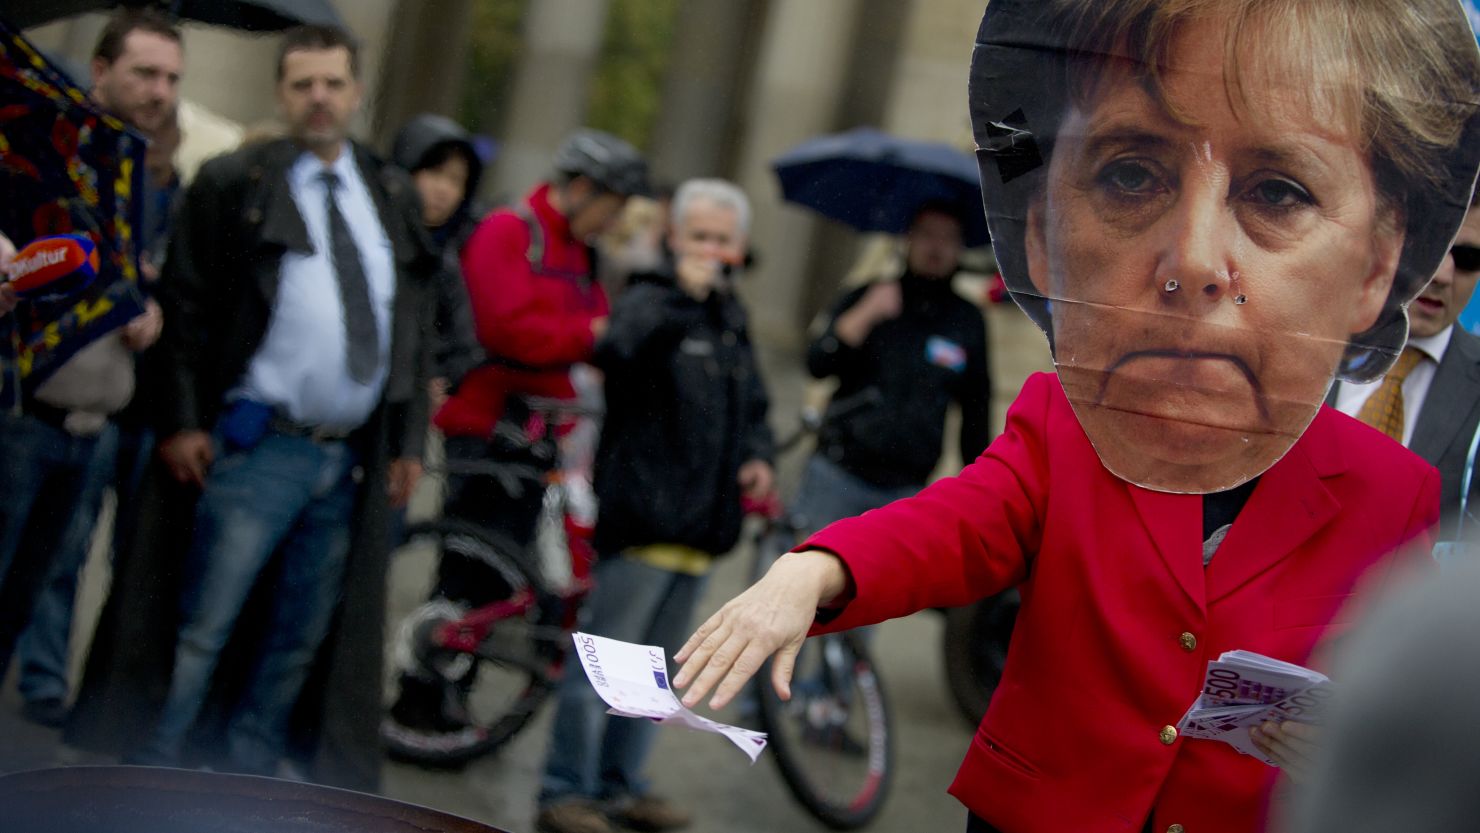 A person wearing an Angela Merkel mask throws fake euros at an anti-euro Alternative for Germany (AfD) rally.